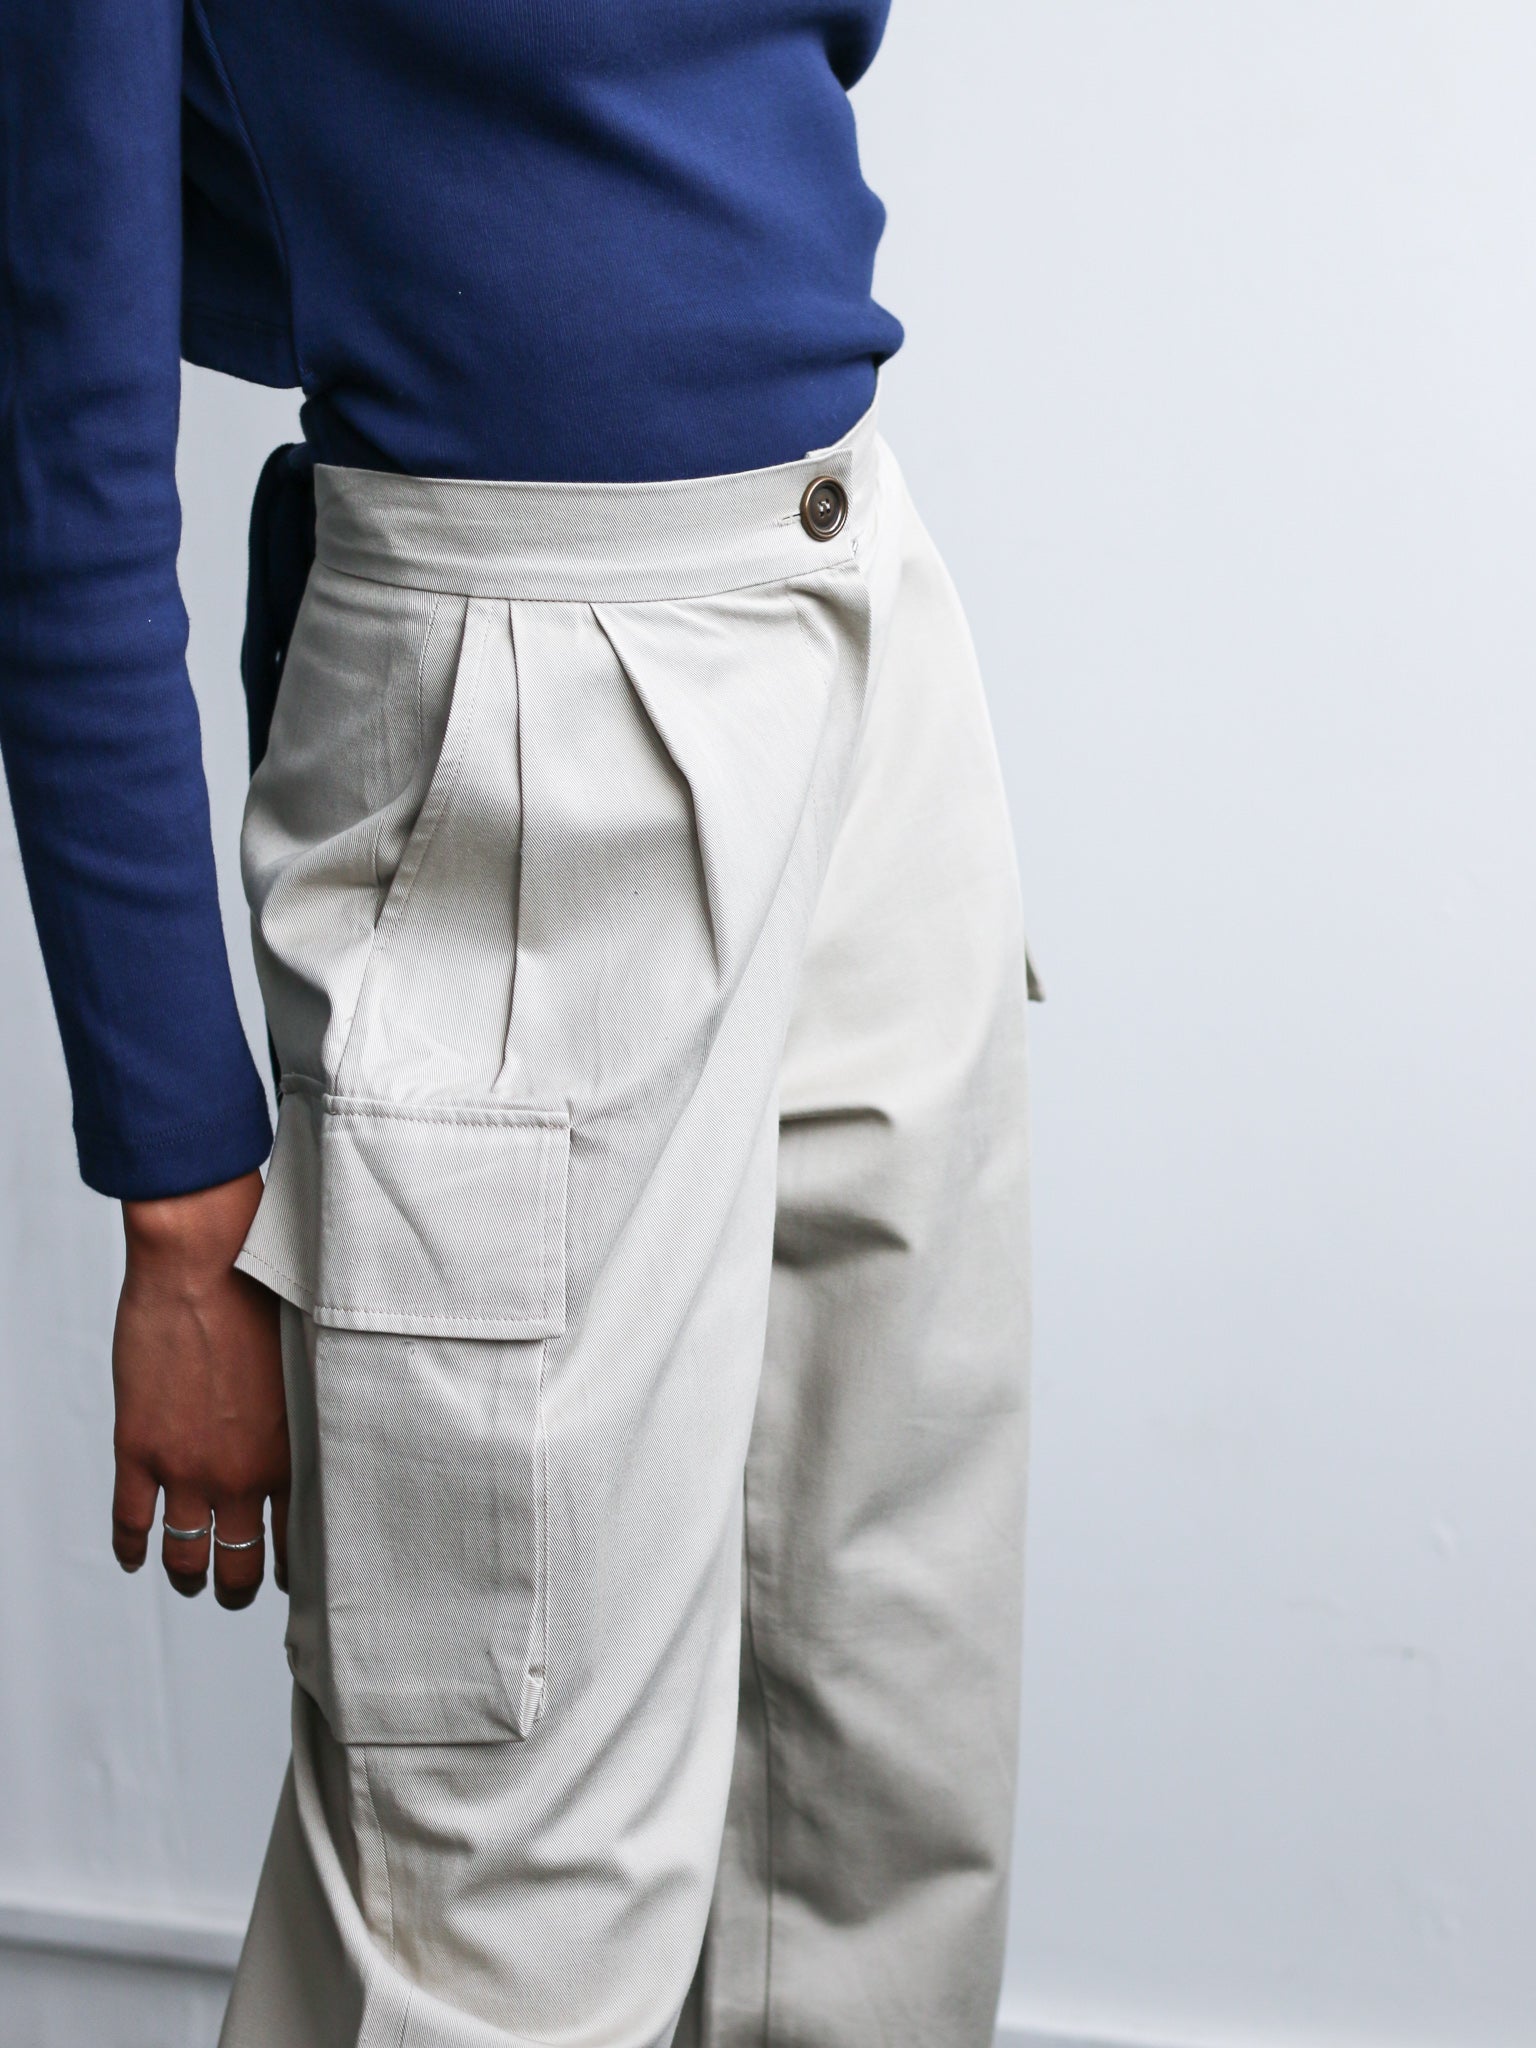 Organic Cotton Beige Utility Cargo Pant with two side pockets & buckles on the ankles. Sustainably made in the UK by ethical clothing brand Fanfare Label Edit alt text